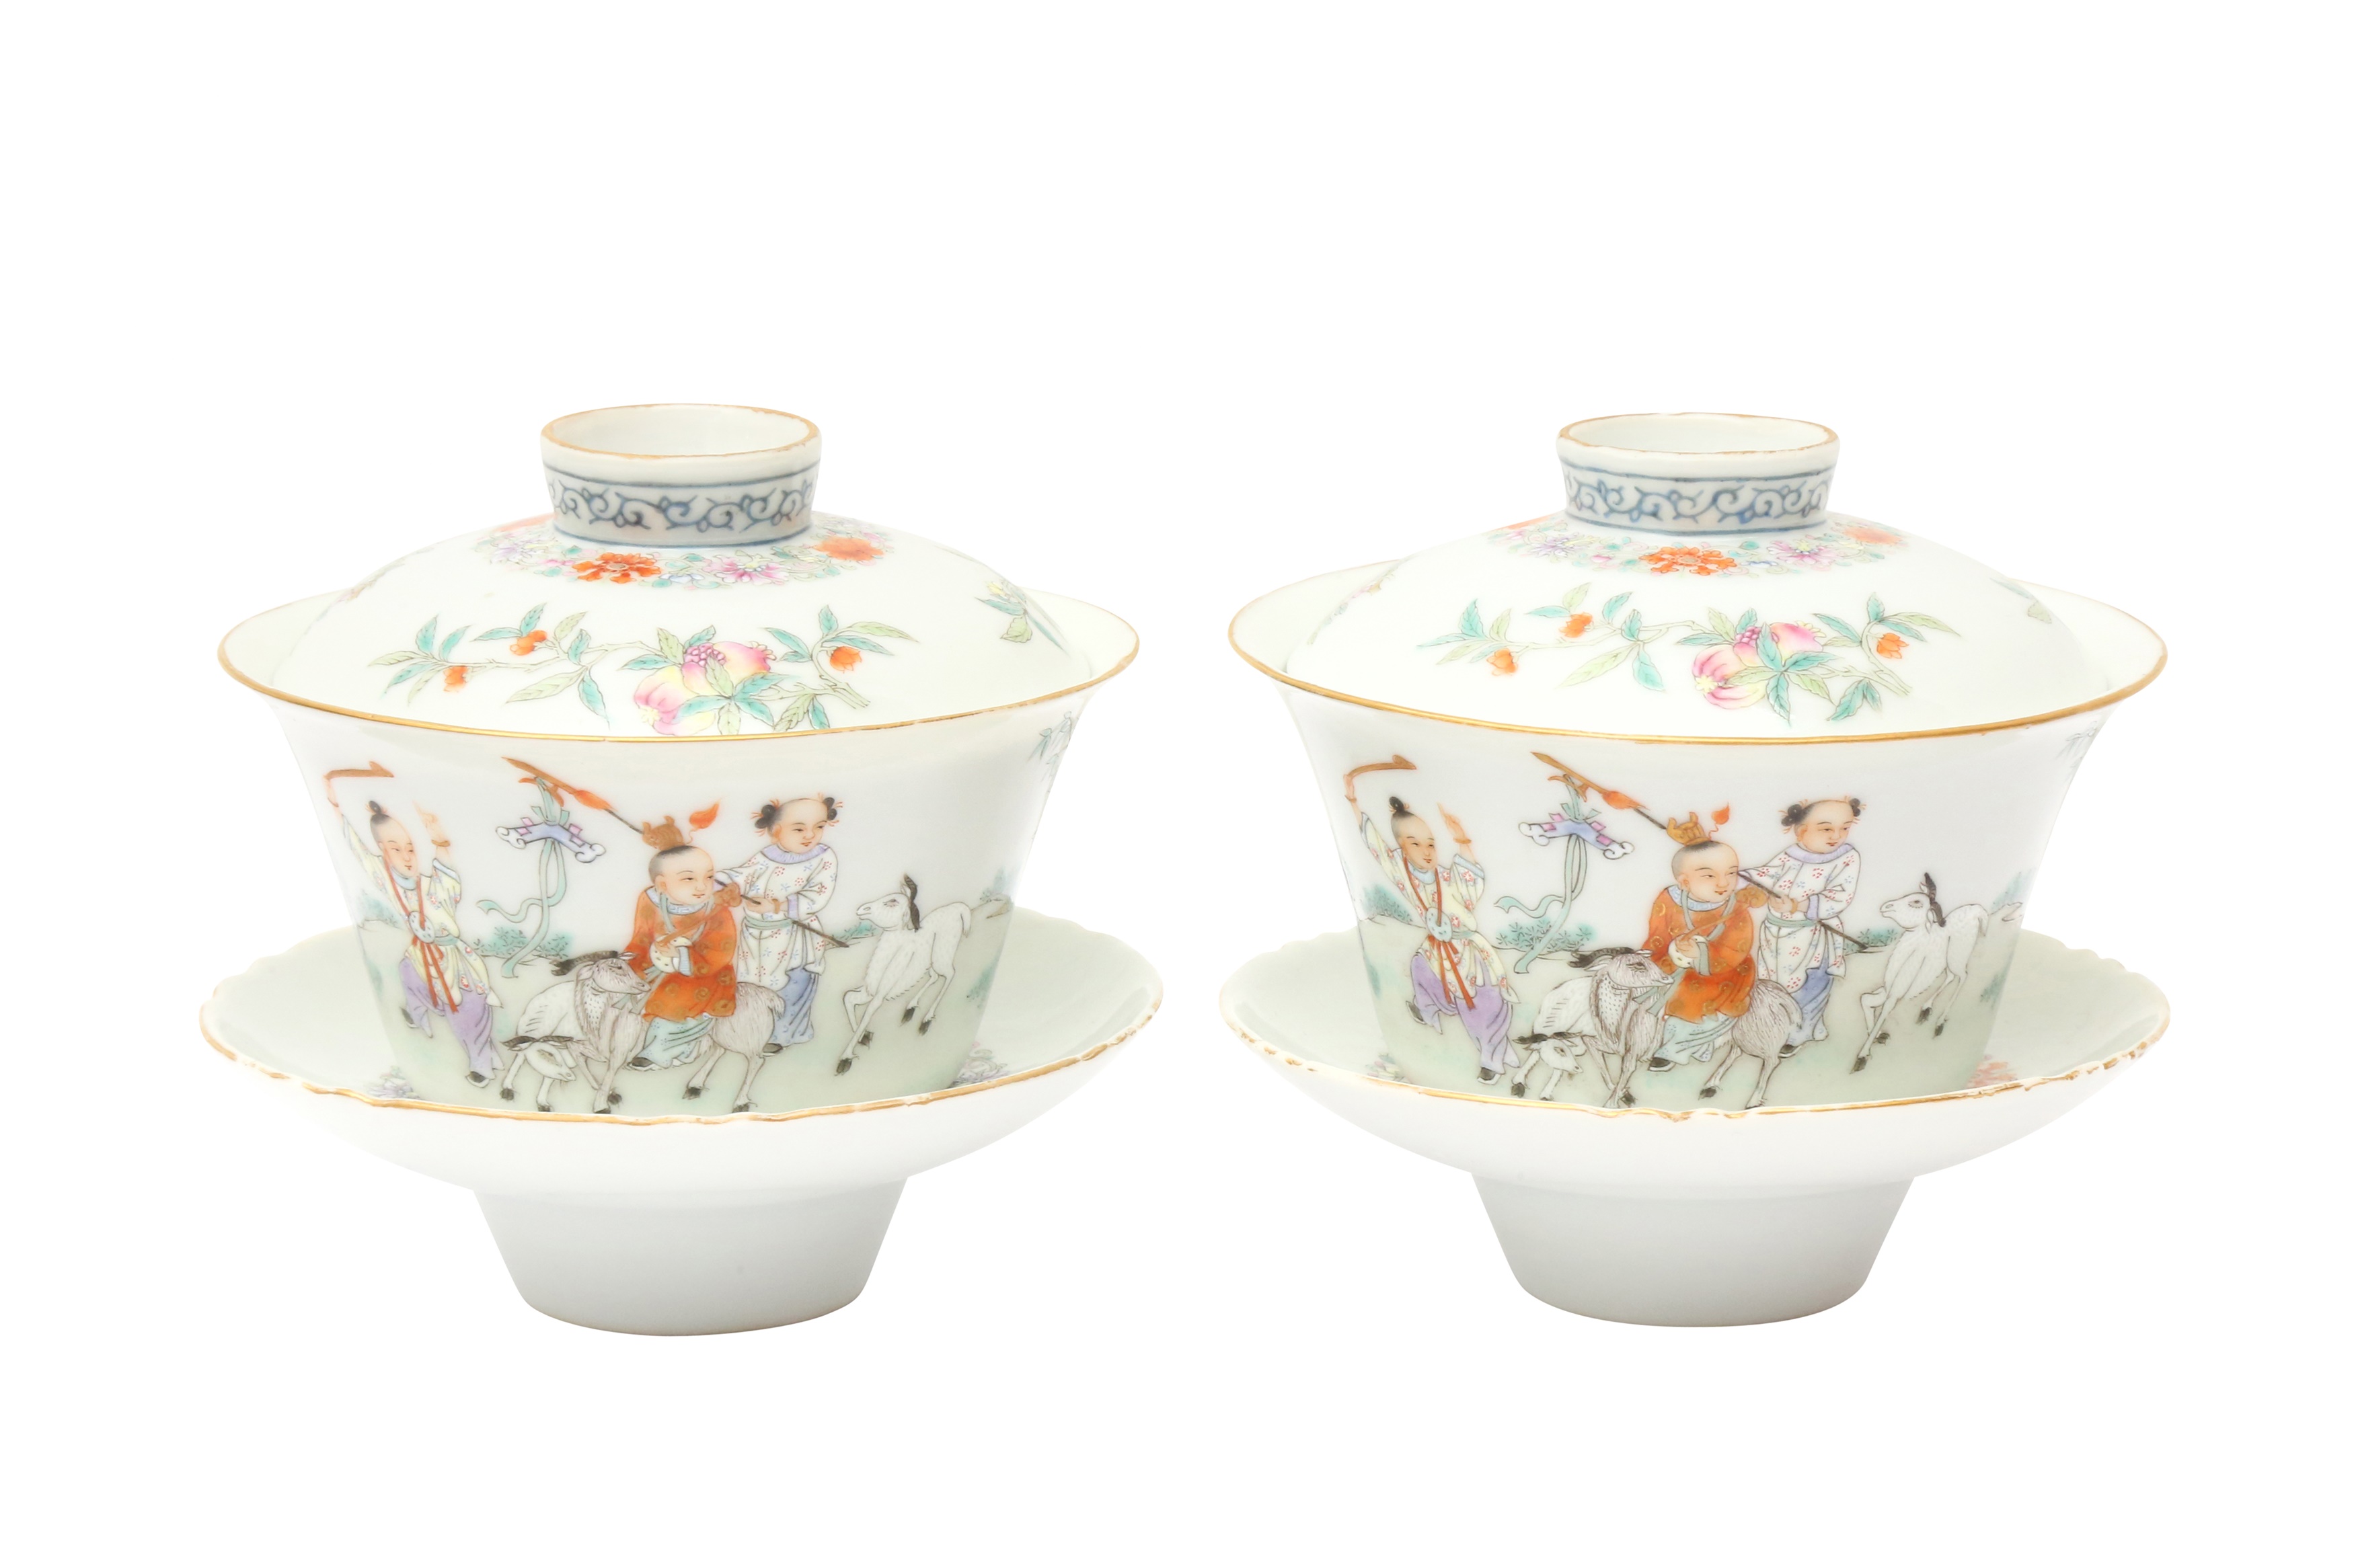 A PAIR OF CHINESE FAMILLE-ROSE CUPS, COVERS AND STANDS 民國時期 粉彩嬰戲圖蓋盌一對 《麟指呈祥》款